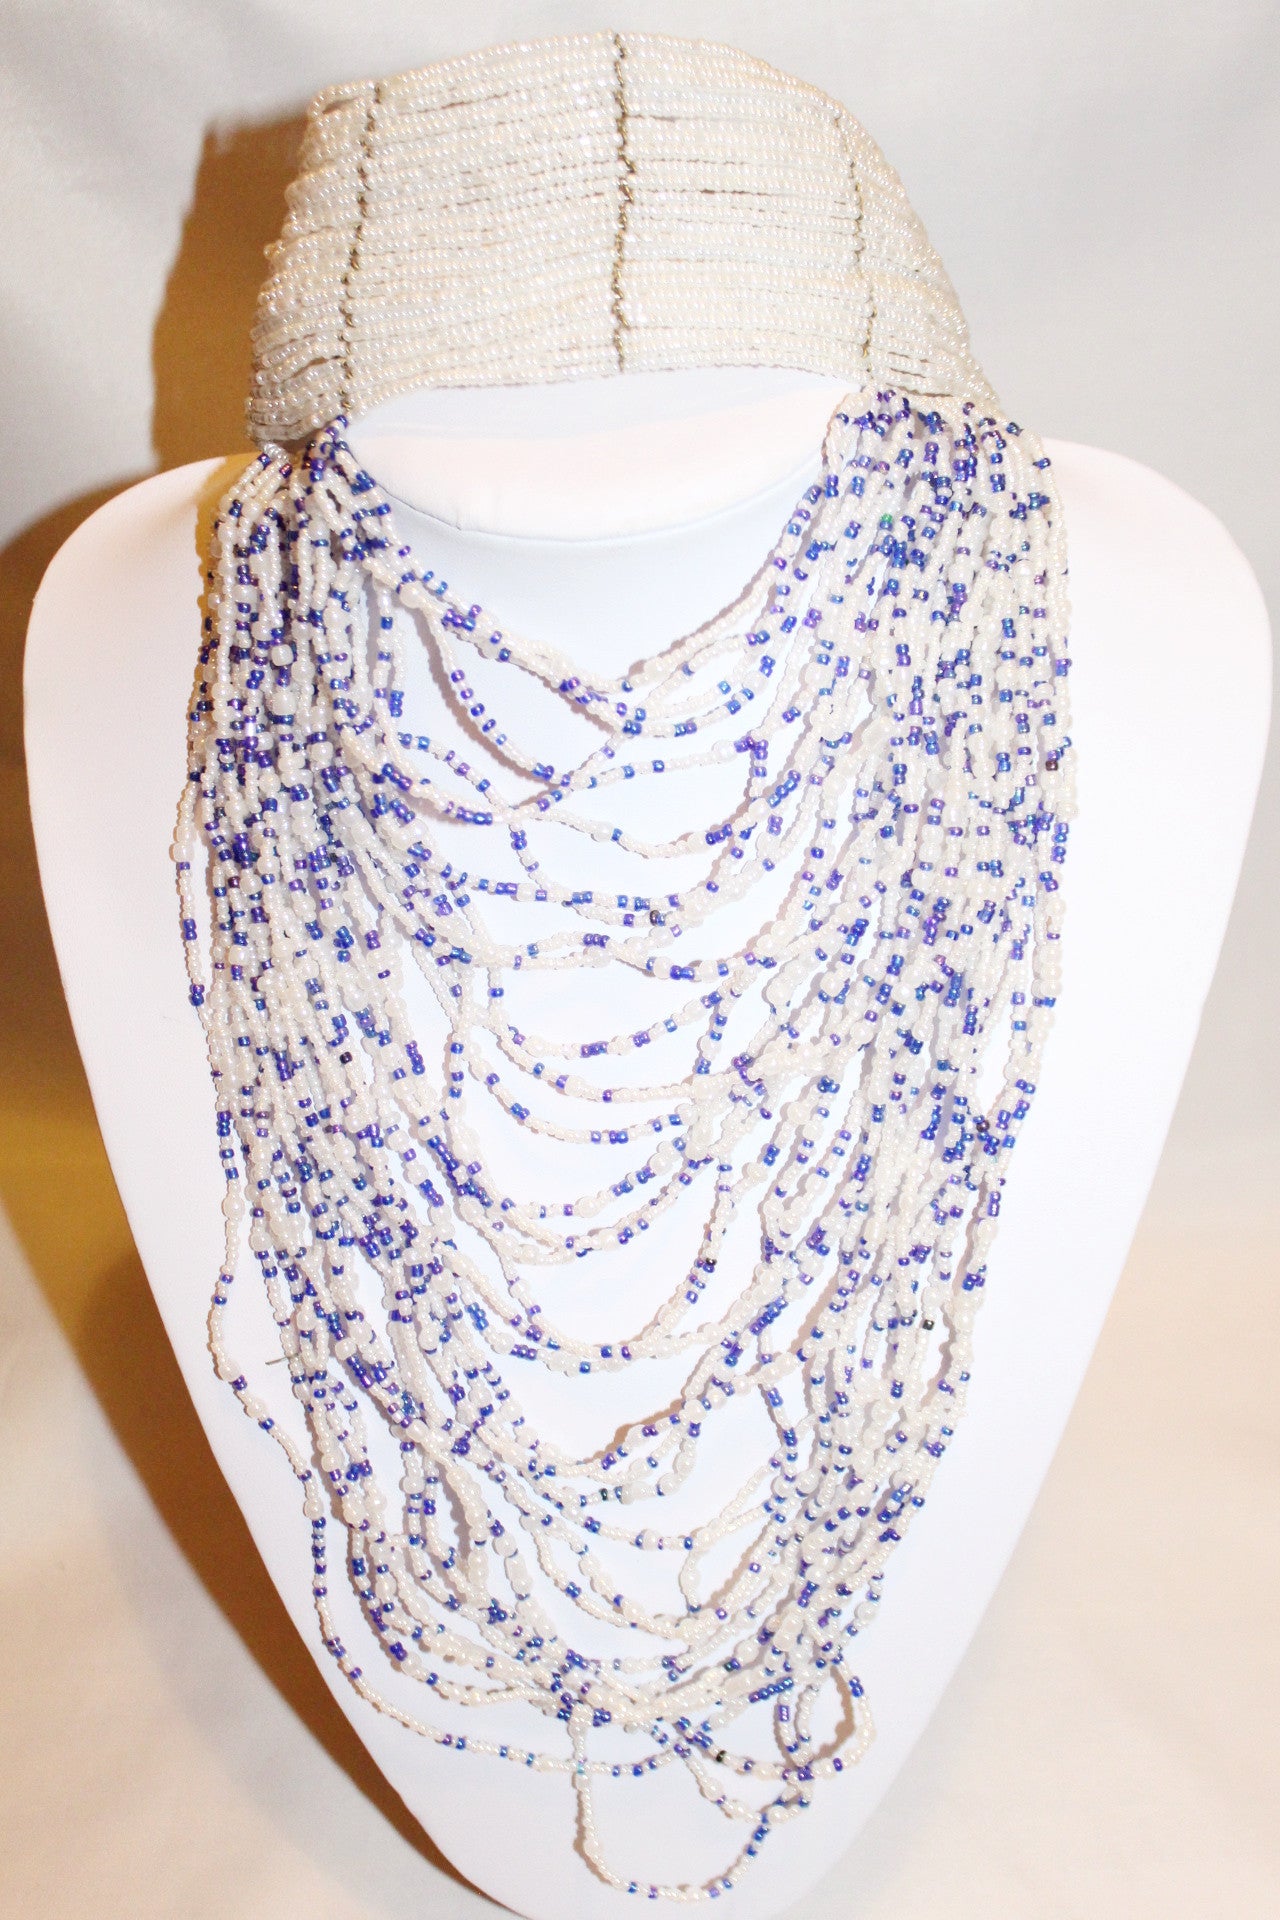 Blue and white choker necklace